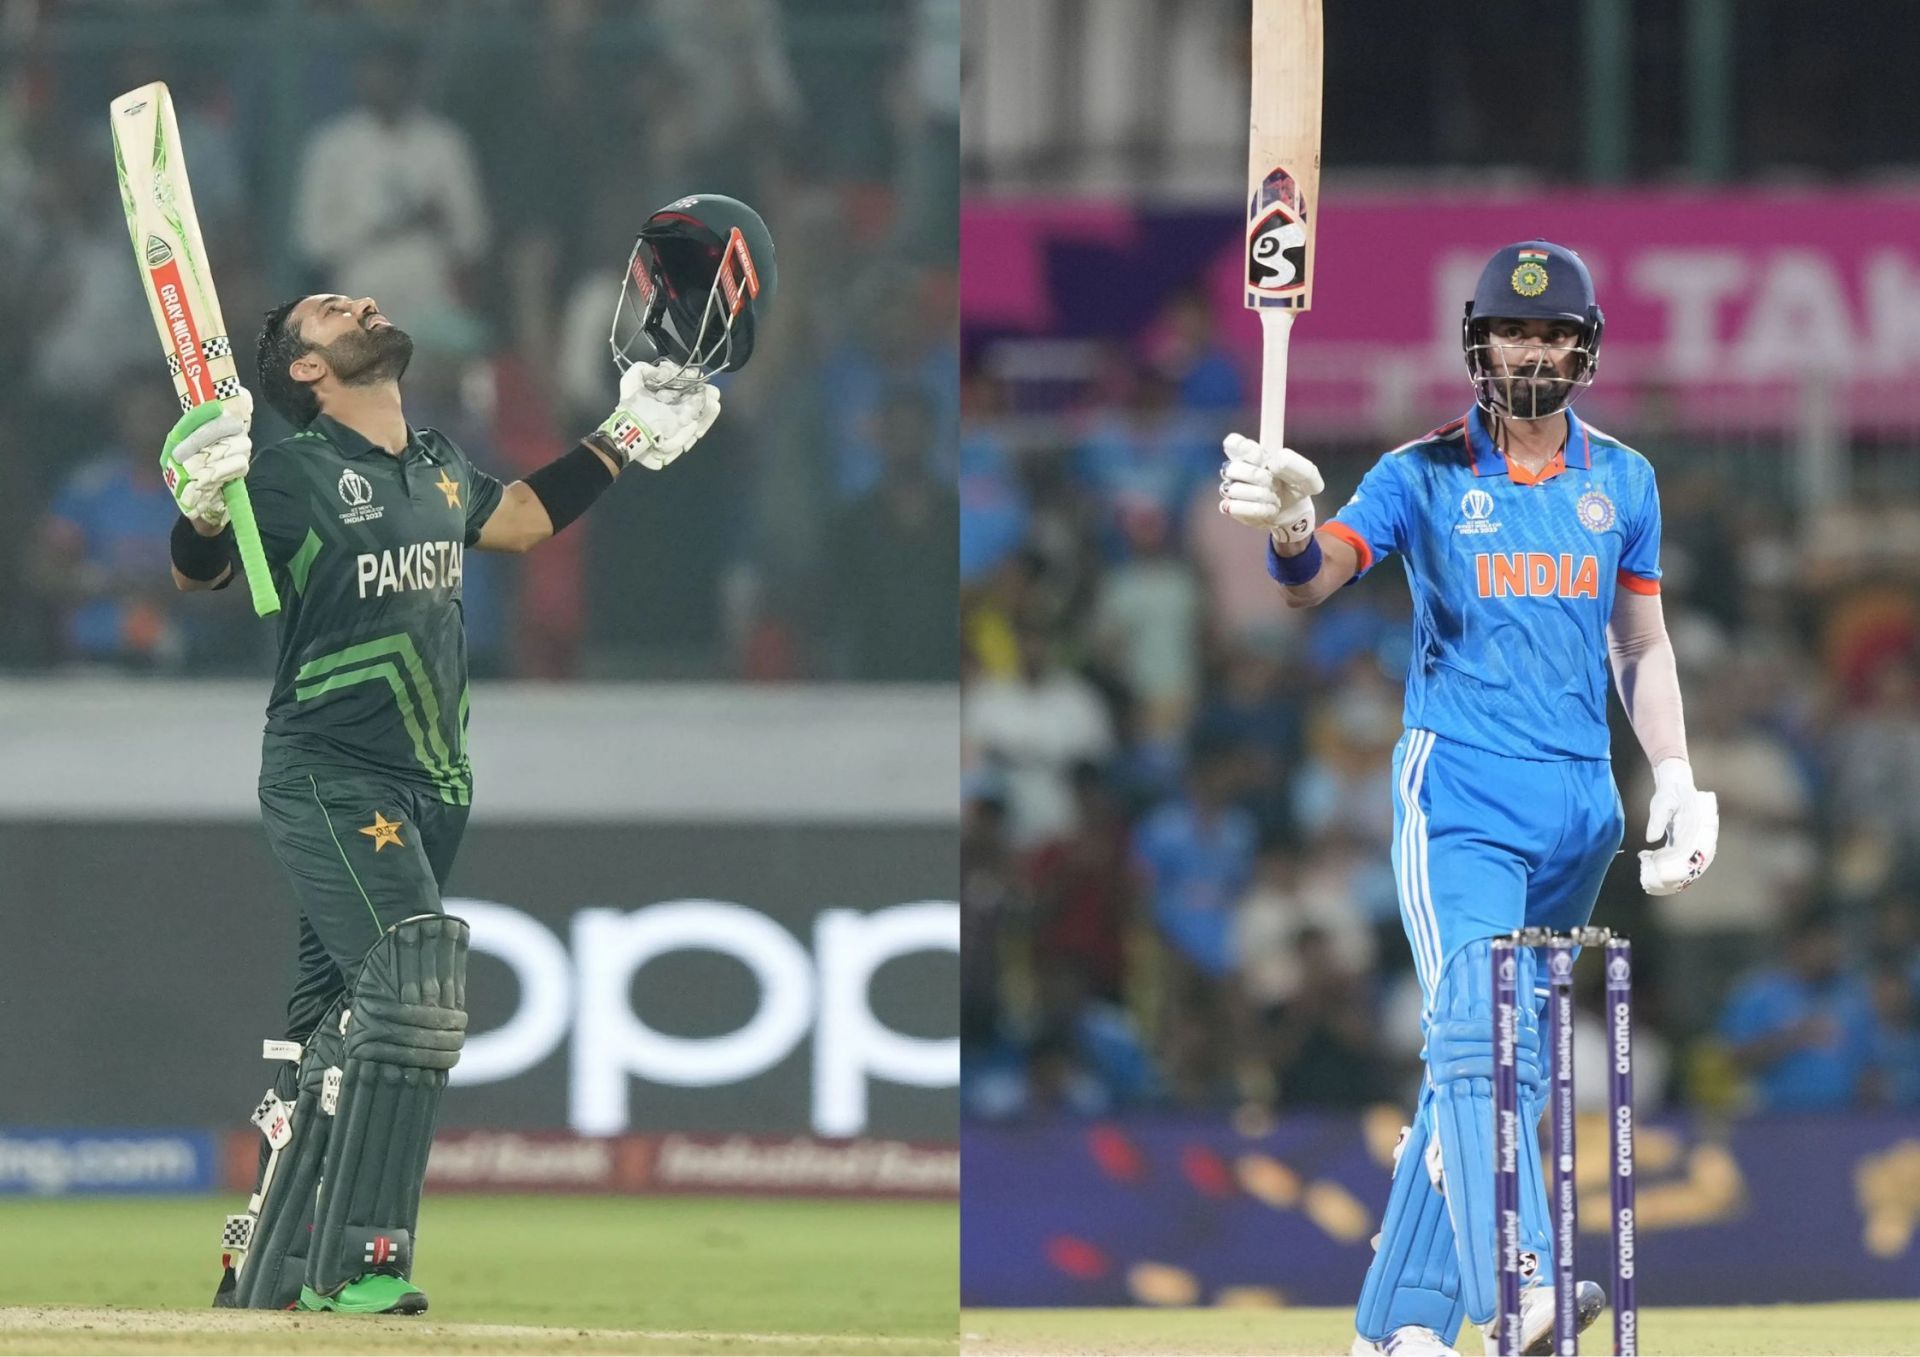 Mohammad Rizwan and KL Rahul produced two of the best knocks of the tournament in its opening week.